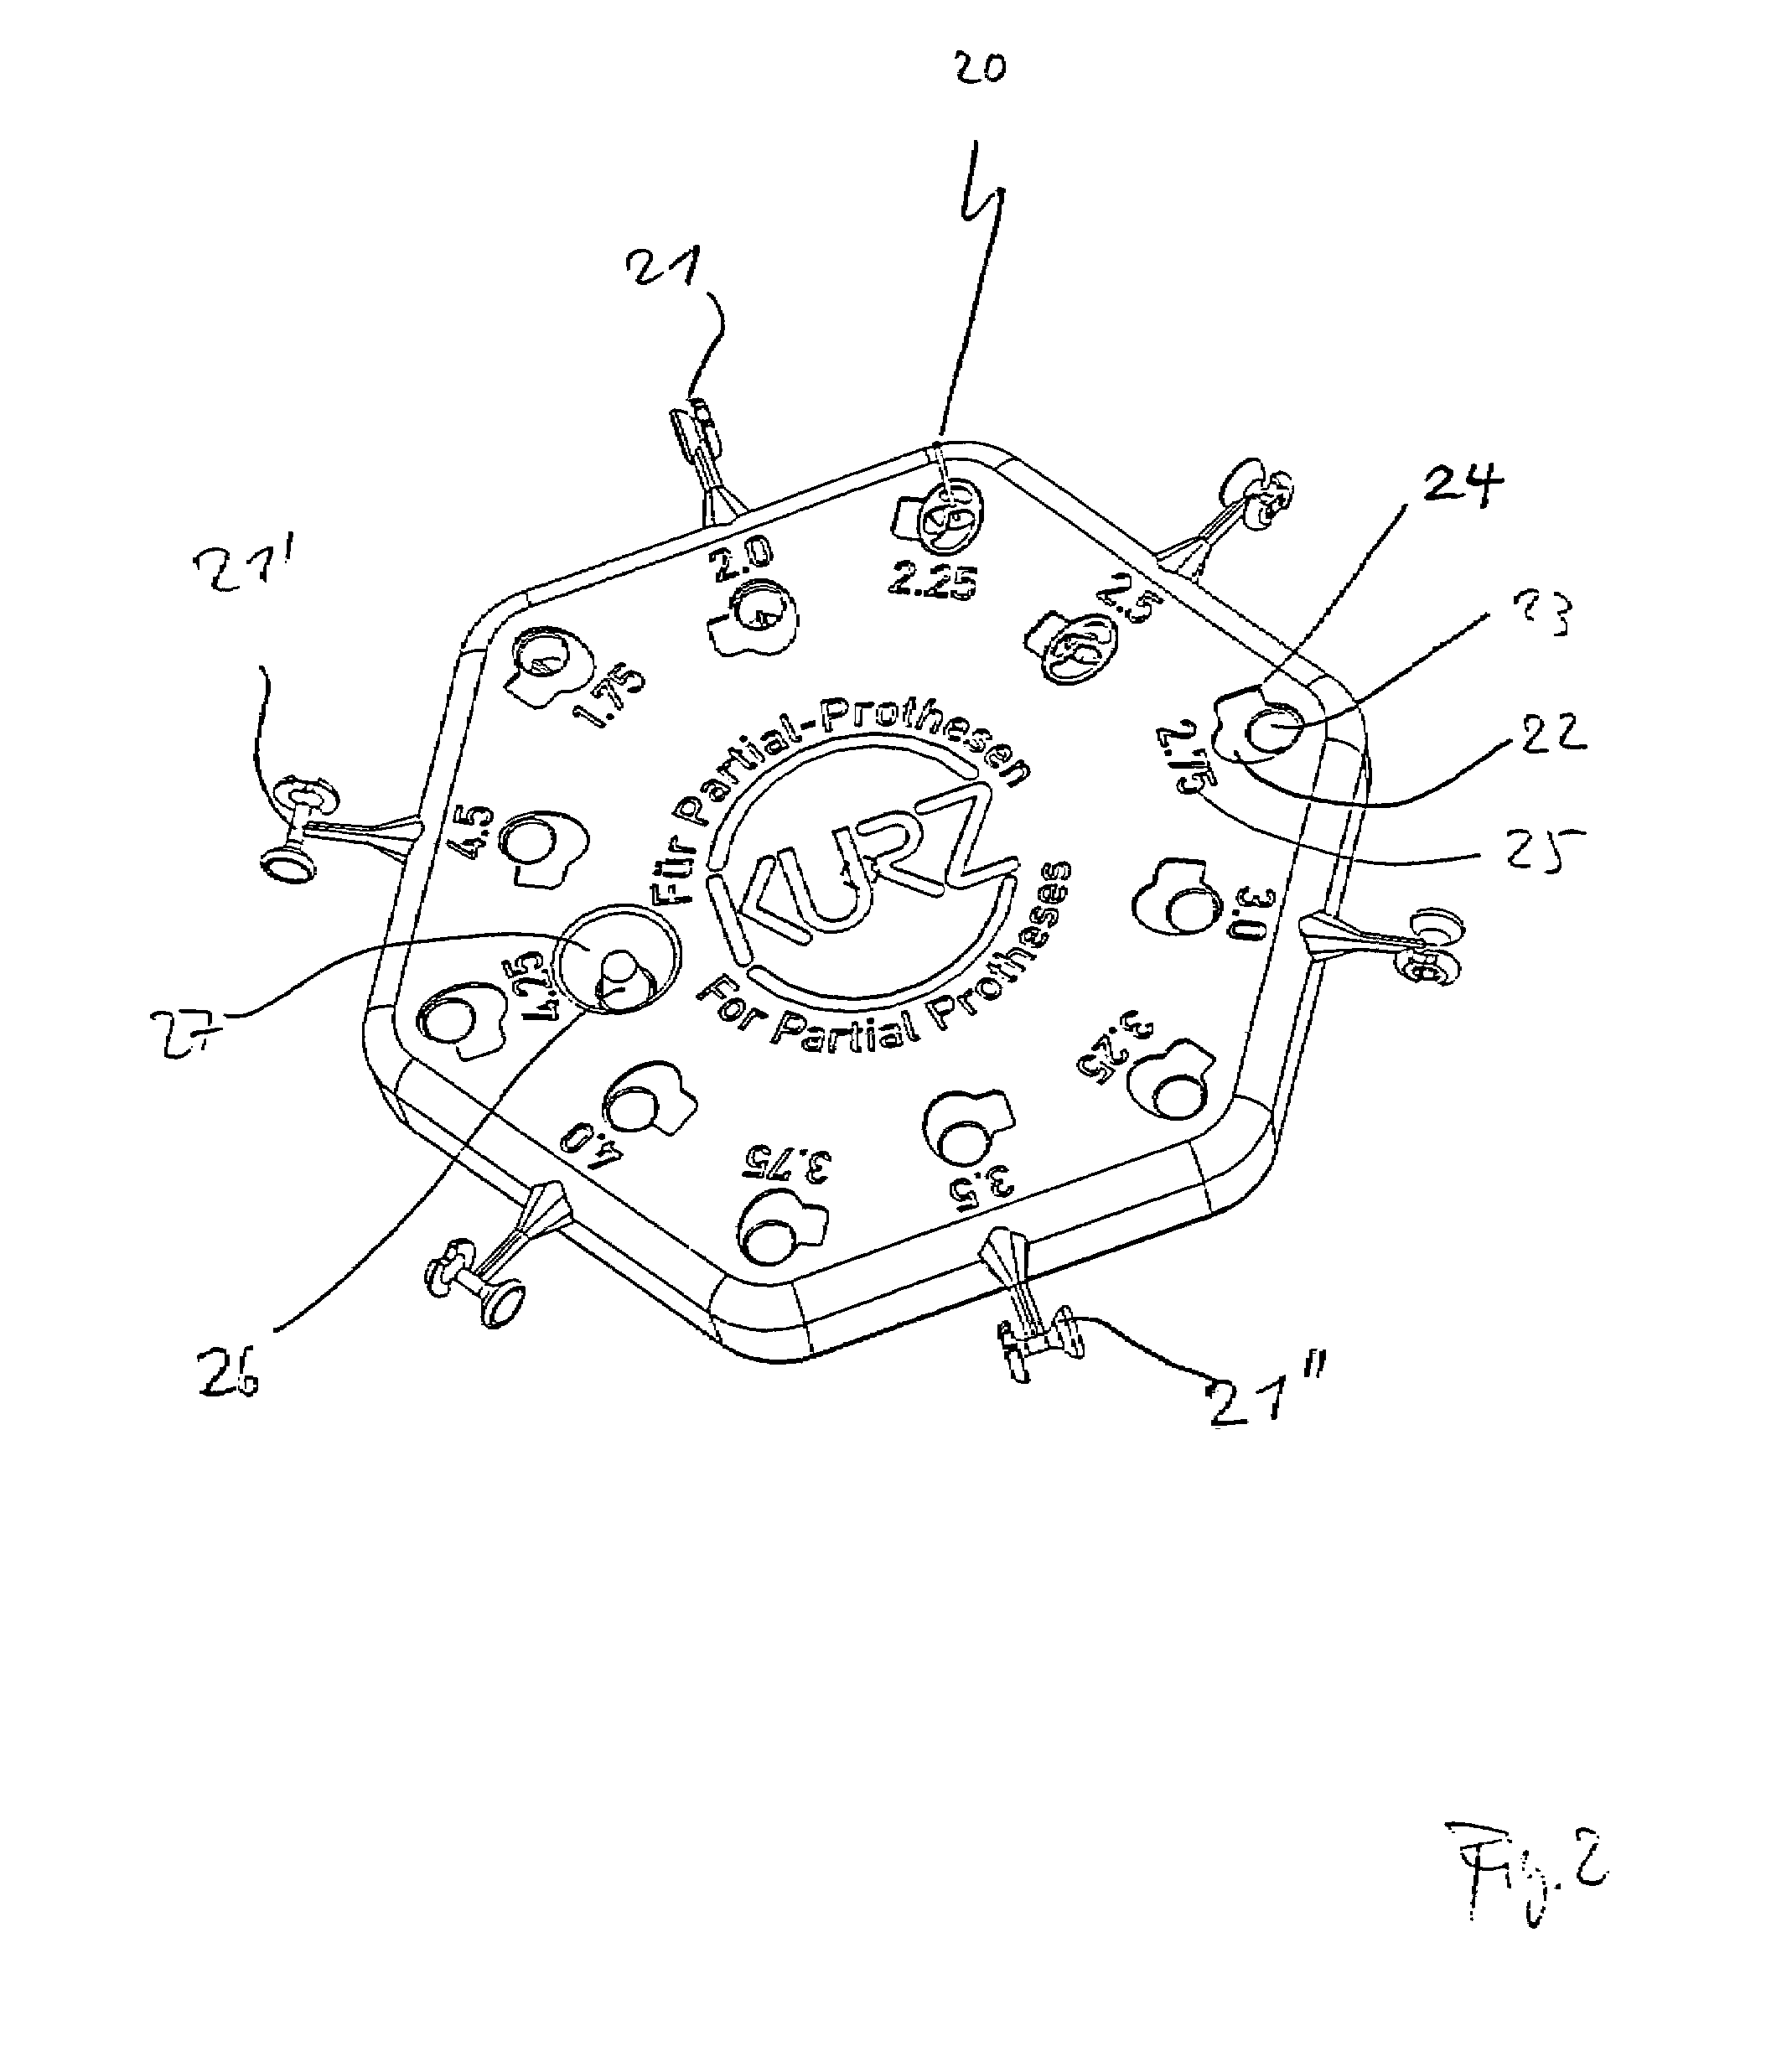 Device for adjusting the length of middle ear implants